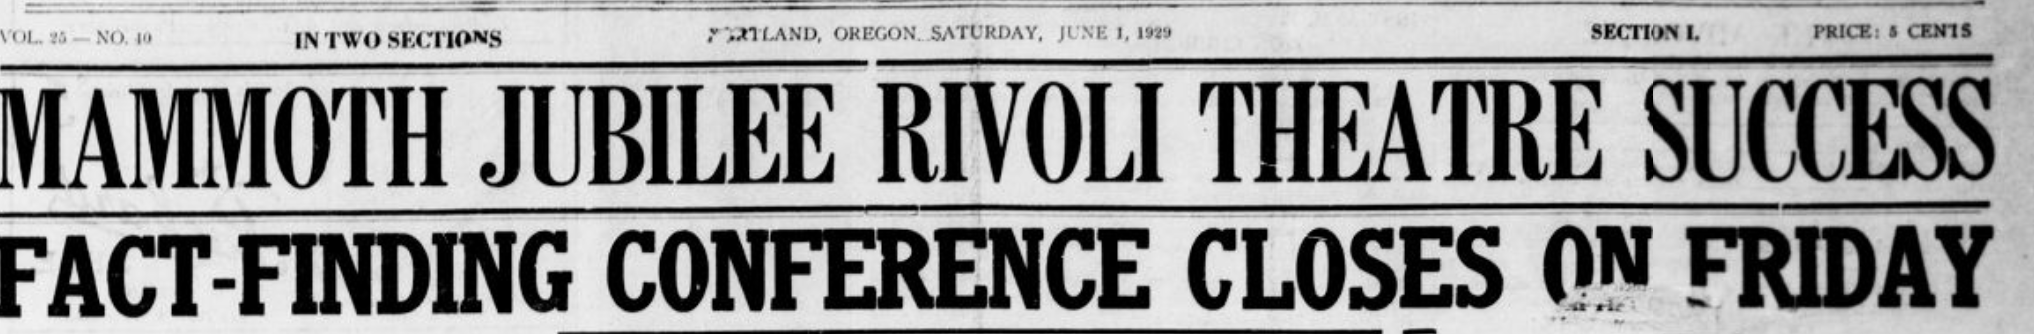 The Advocate, June 1, 1929. Oregon Historic Newspapers.